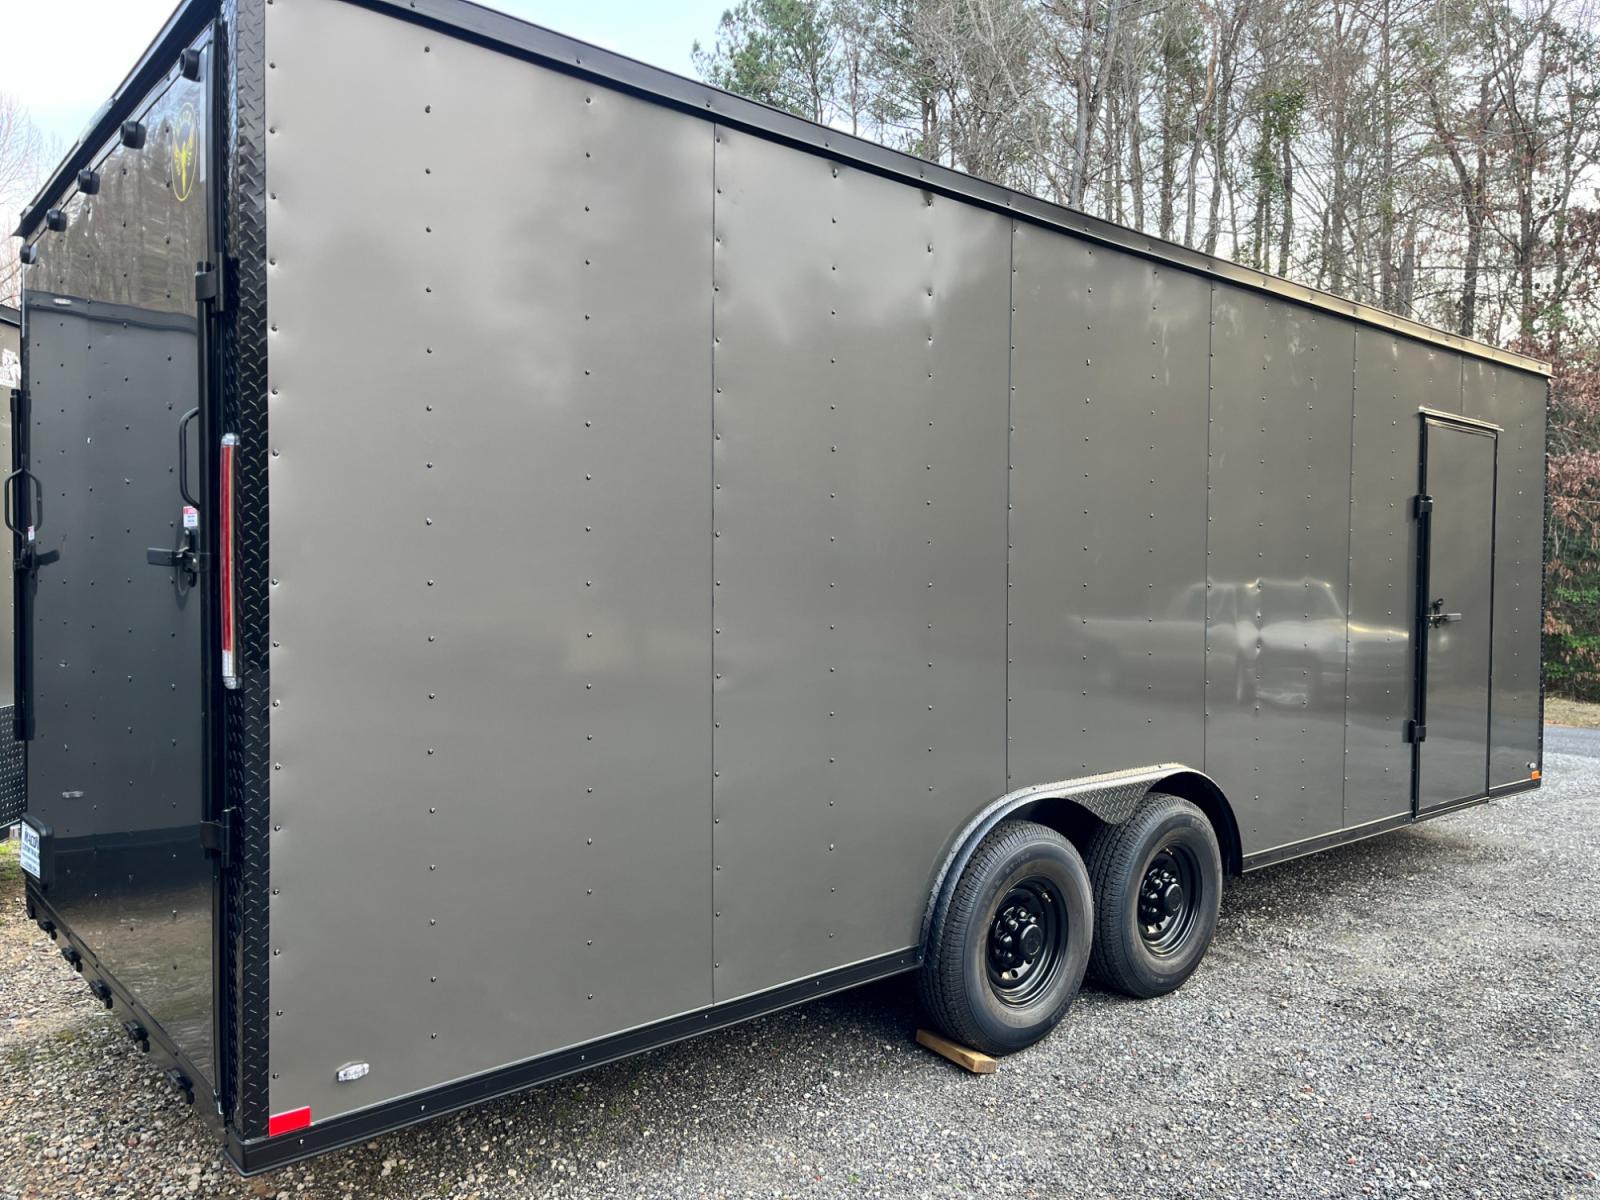 2023 .080 Charcoal Metallic w/Black Out Pkg. Elite Cargo 8.5ft X 24ft Tandem , located at 1330 Rainey Rd., Macon, 31220, (478) 960-1044, 32.845638, -83.778687 - Brand New 2023 Model Elite Cargo Trailer, Made in Tifton, GA 7ft 5" Tall Inside Height This Deluxe Enclosed Car Hauler has Awesome Features! .080 Thick Charcoal Metallic Skin! Awesome "Black Out Trim Package!" 2 Inside LED Dome Lights with Wall Switch! Much Taller Inside, 7ft 5" Tall Inside. Th - Photo #1